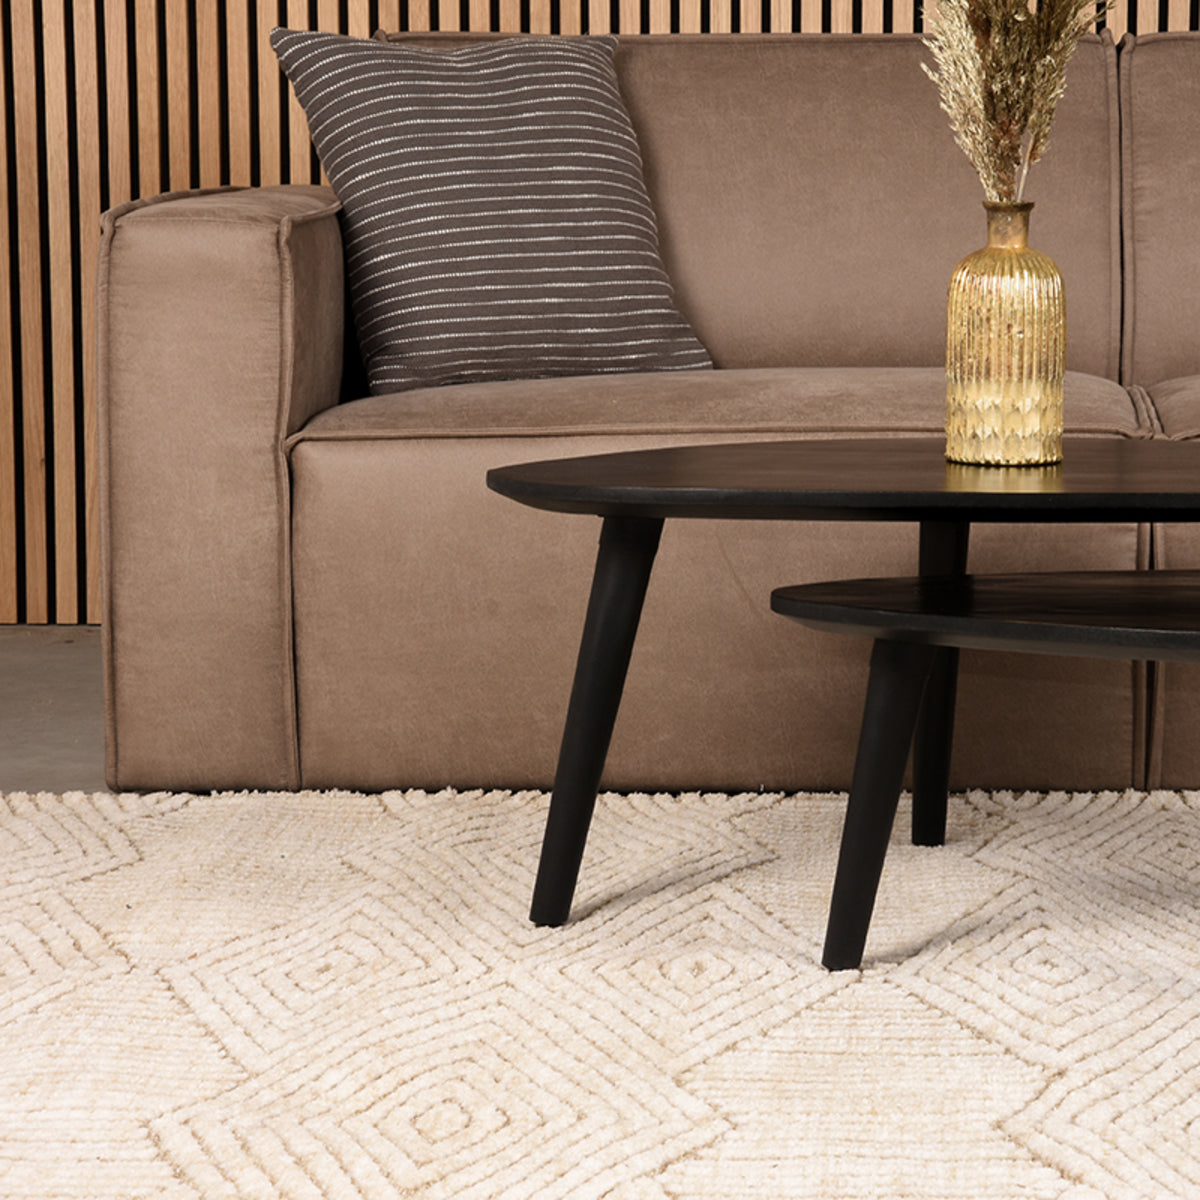 LABEL51 Rugs Cozy - Taupe - Synthetic - 160x230 cm